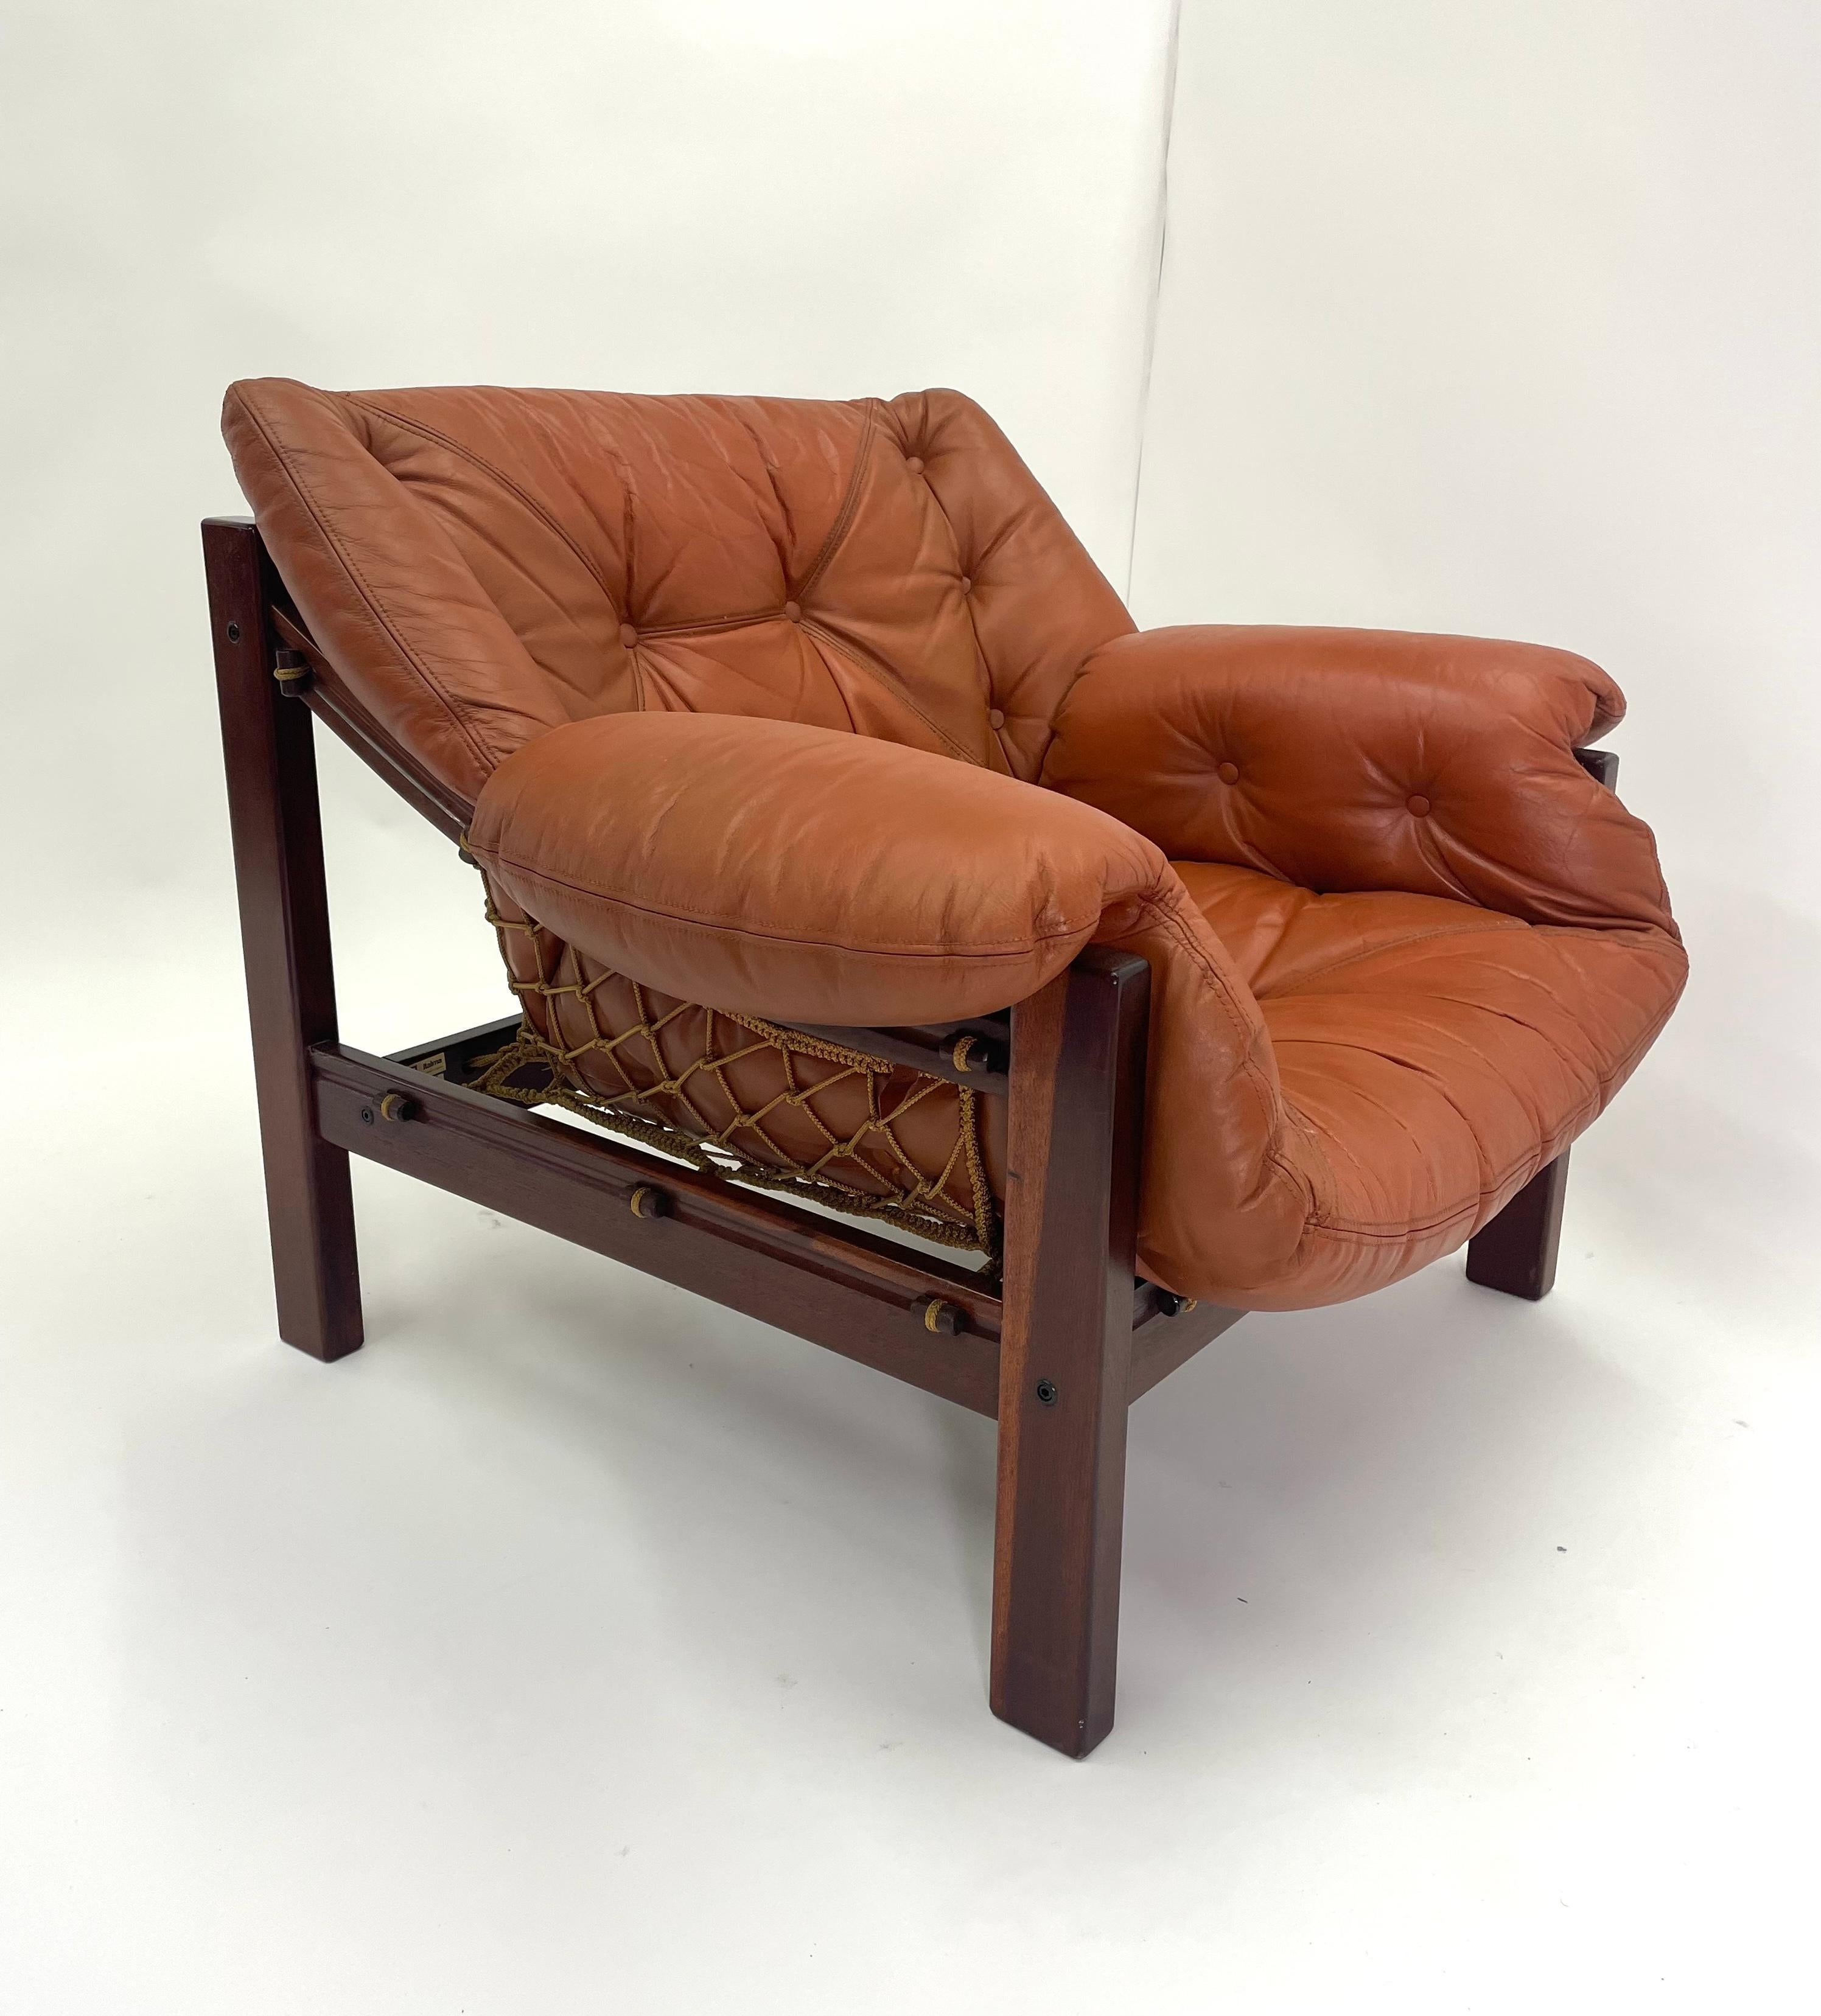 The Brazilian Jangada Chair with ottoman, designed by Jean Gillon, embodies the essence of comfort and sophistication with a distinct touch of Brazilian craftsmanship. Inspired by the traditional fishing boats of northeastern Brazil, known as